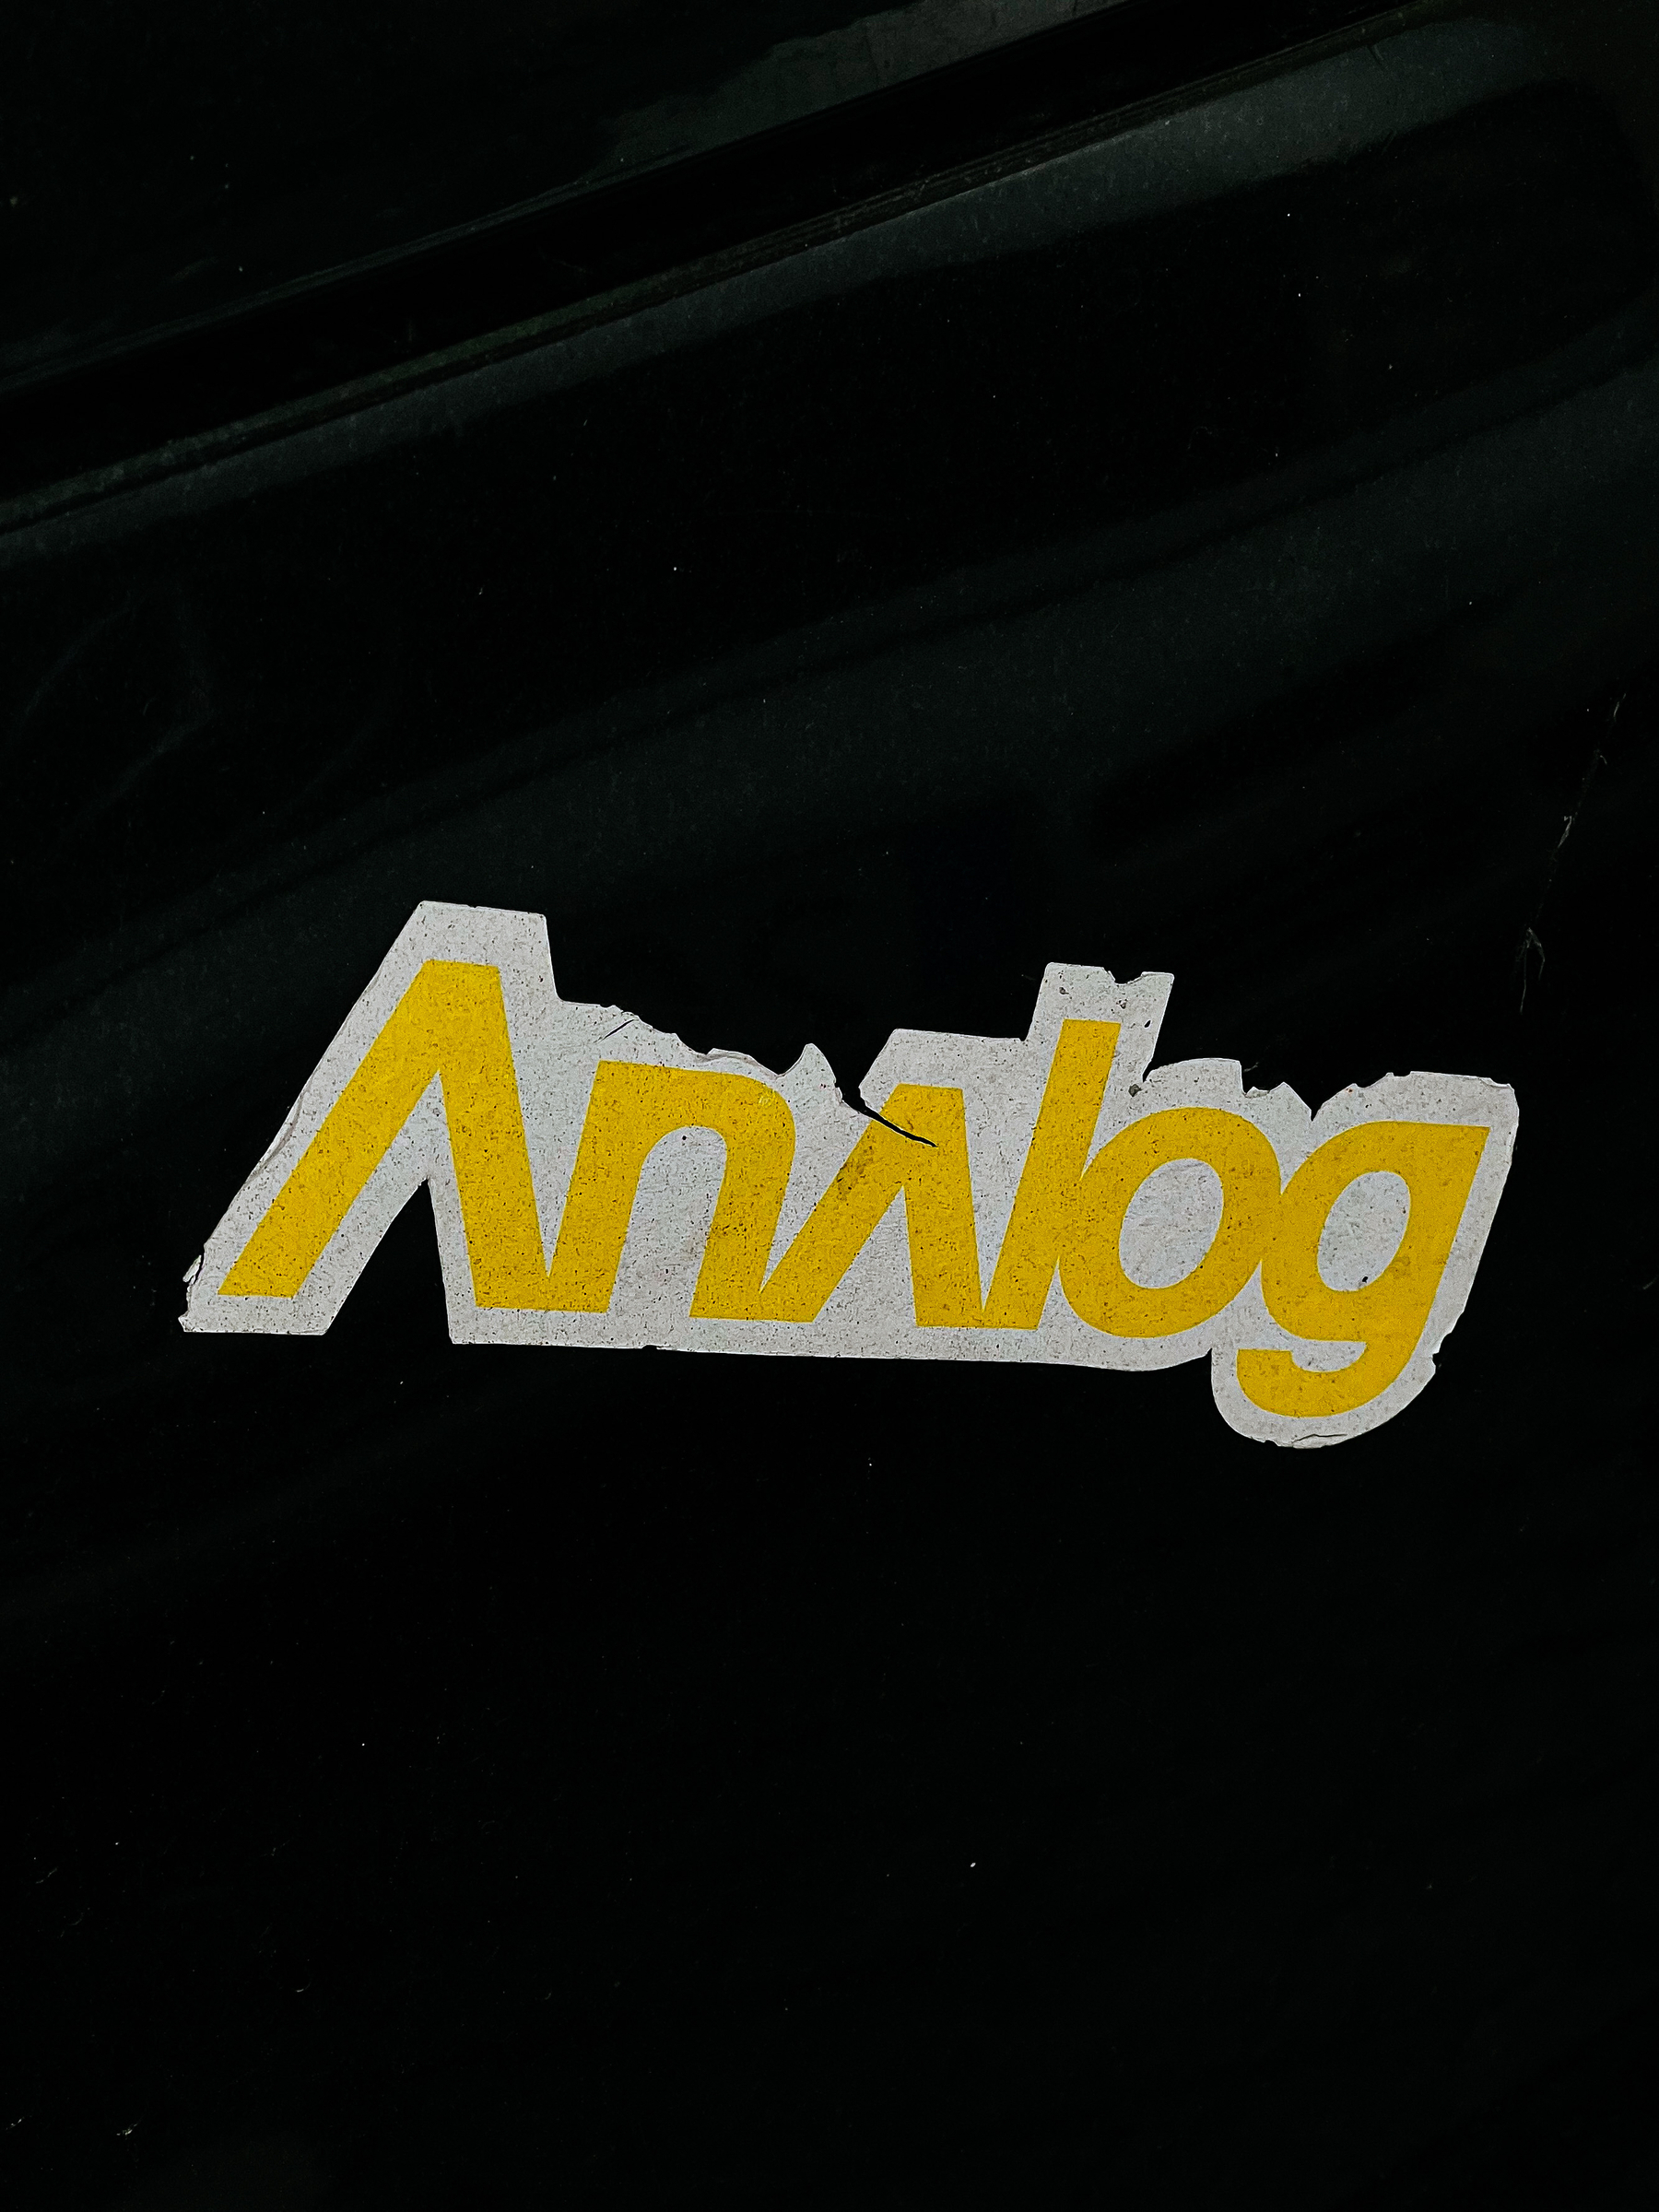 Sticker with the word “analog”. 